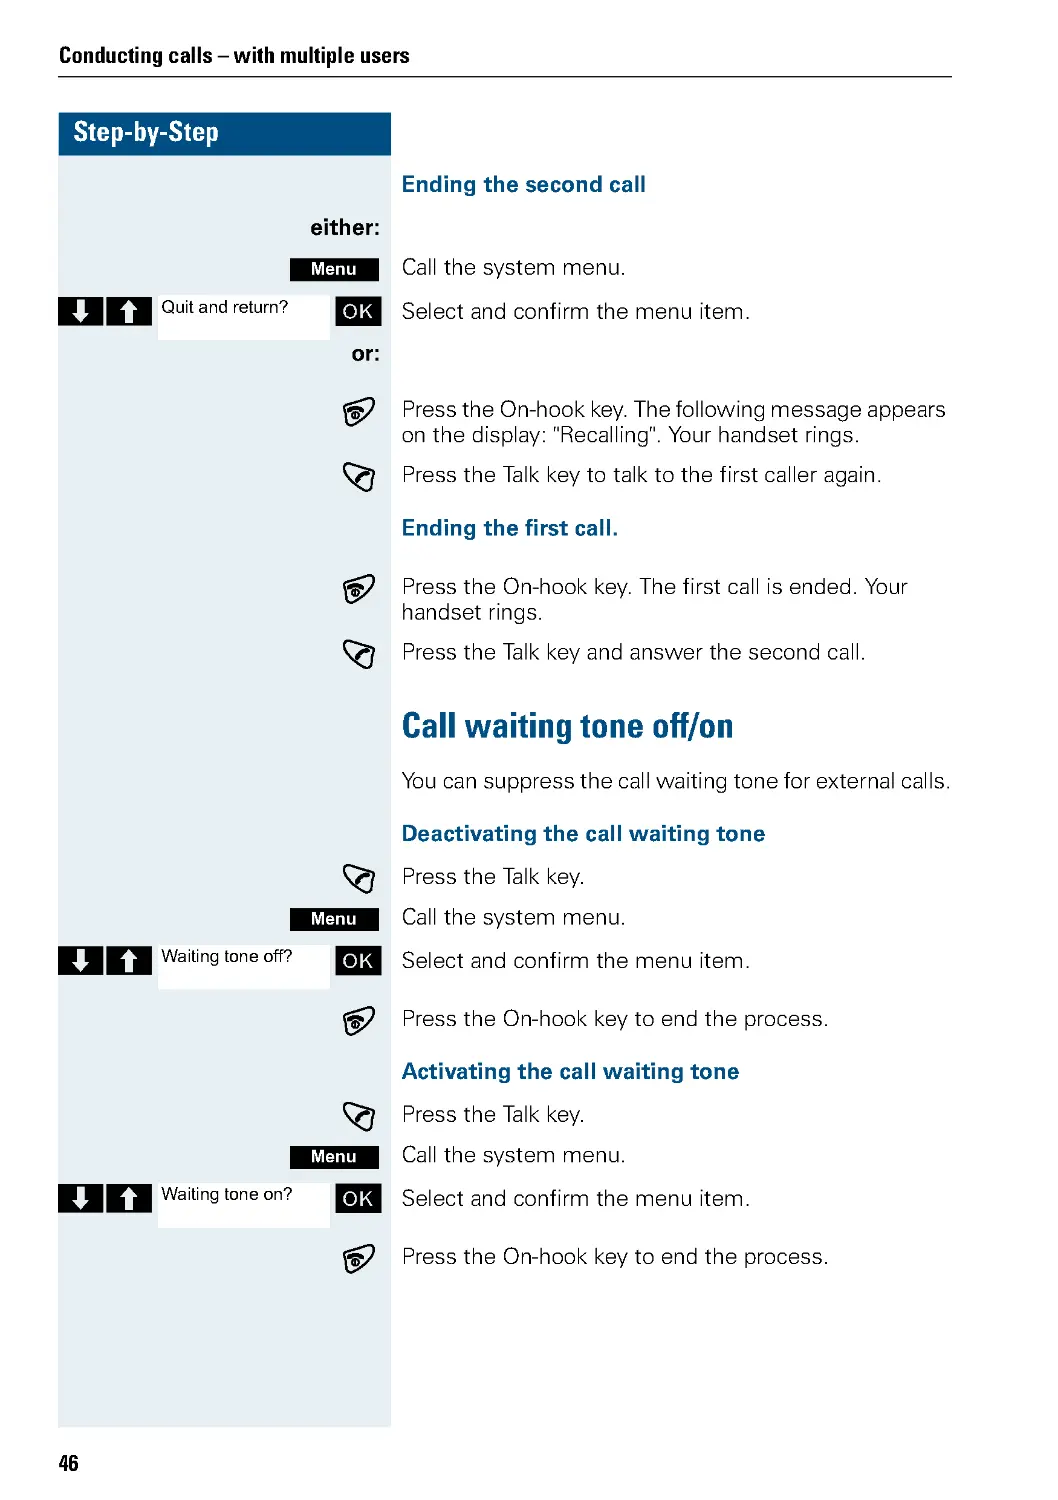 Call waiting tone off/on